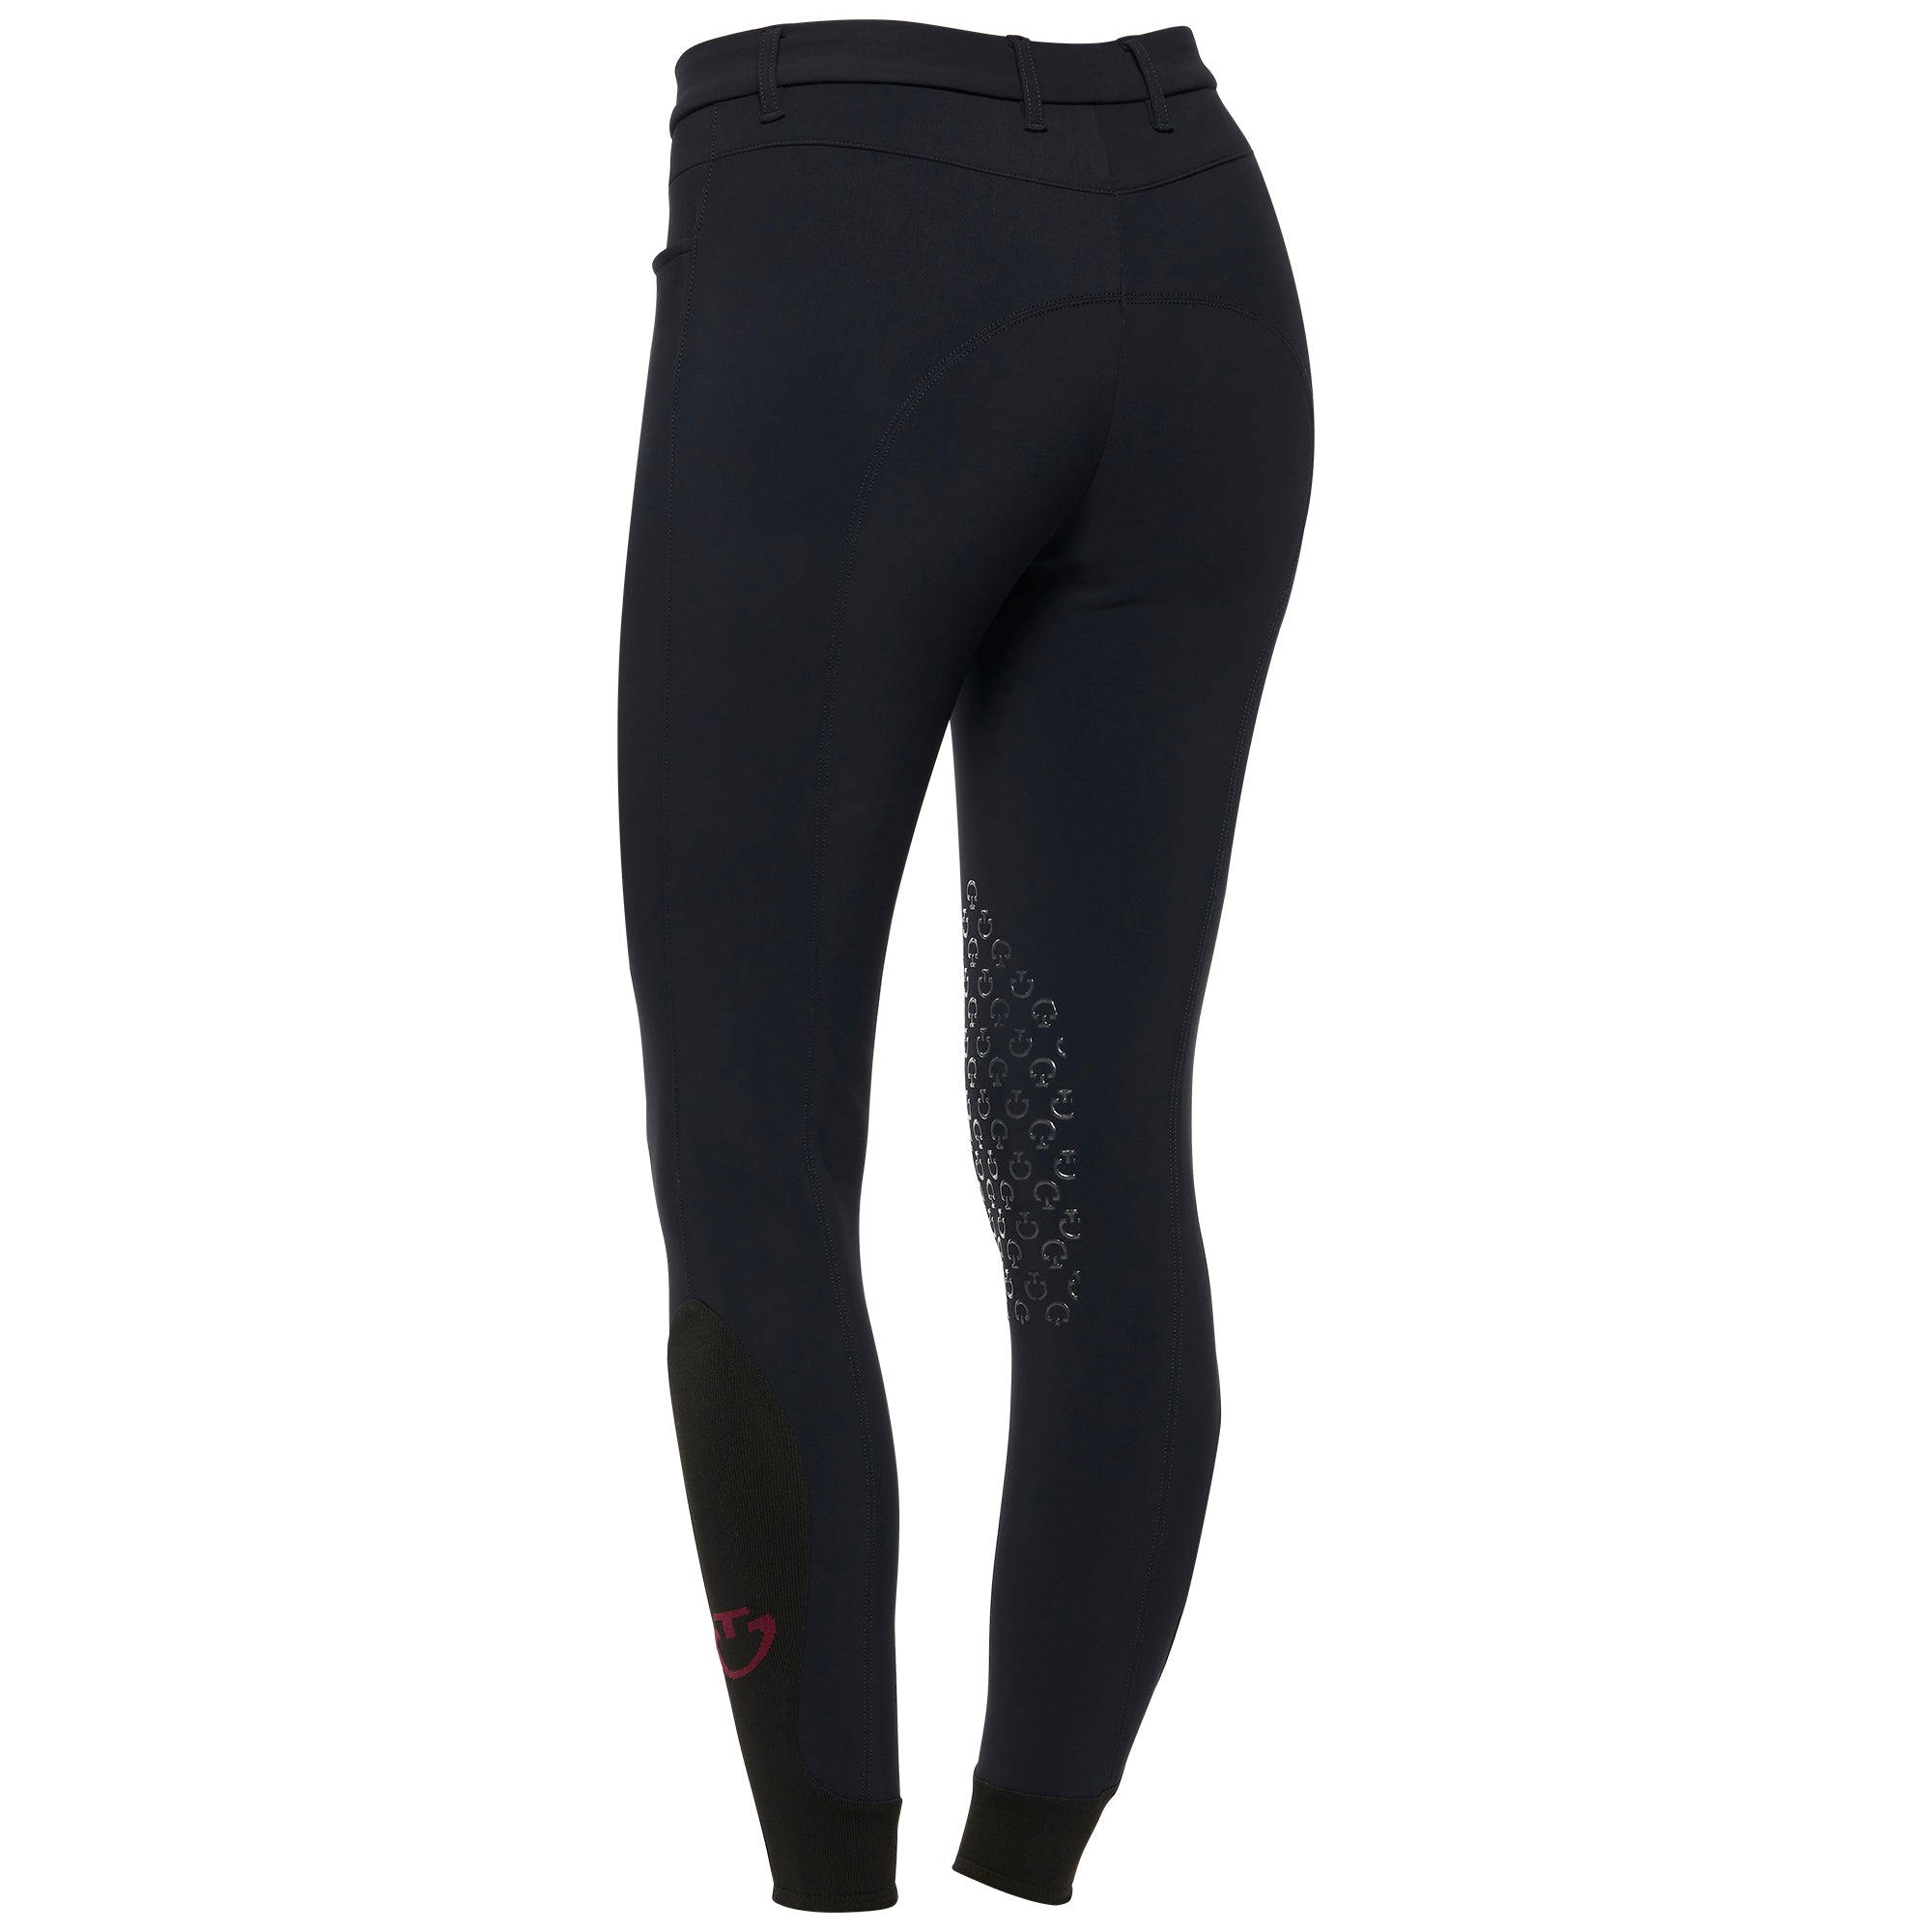 Cavalleria Toscana New Grip System Breeches - Grip Knee Patches